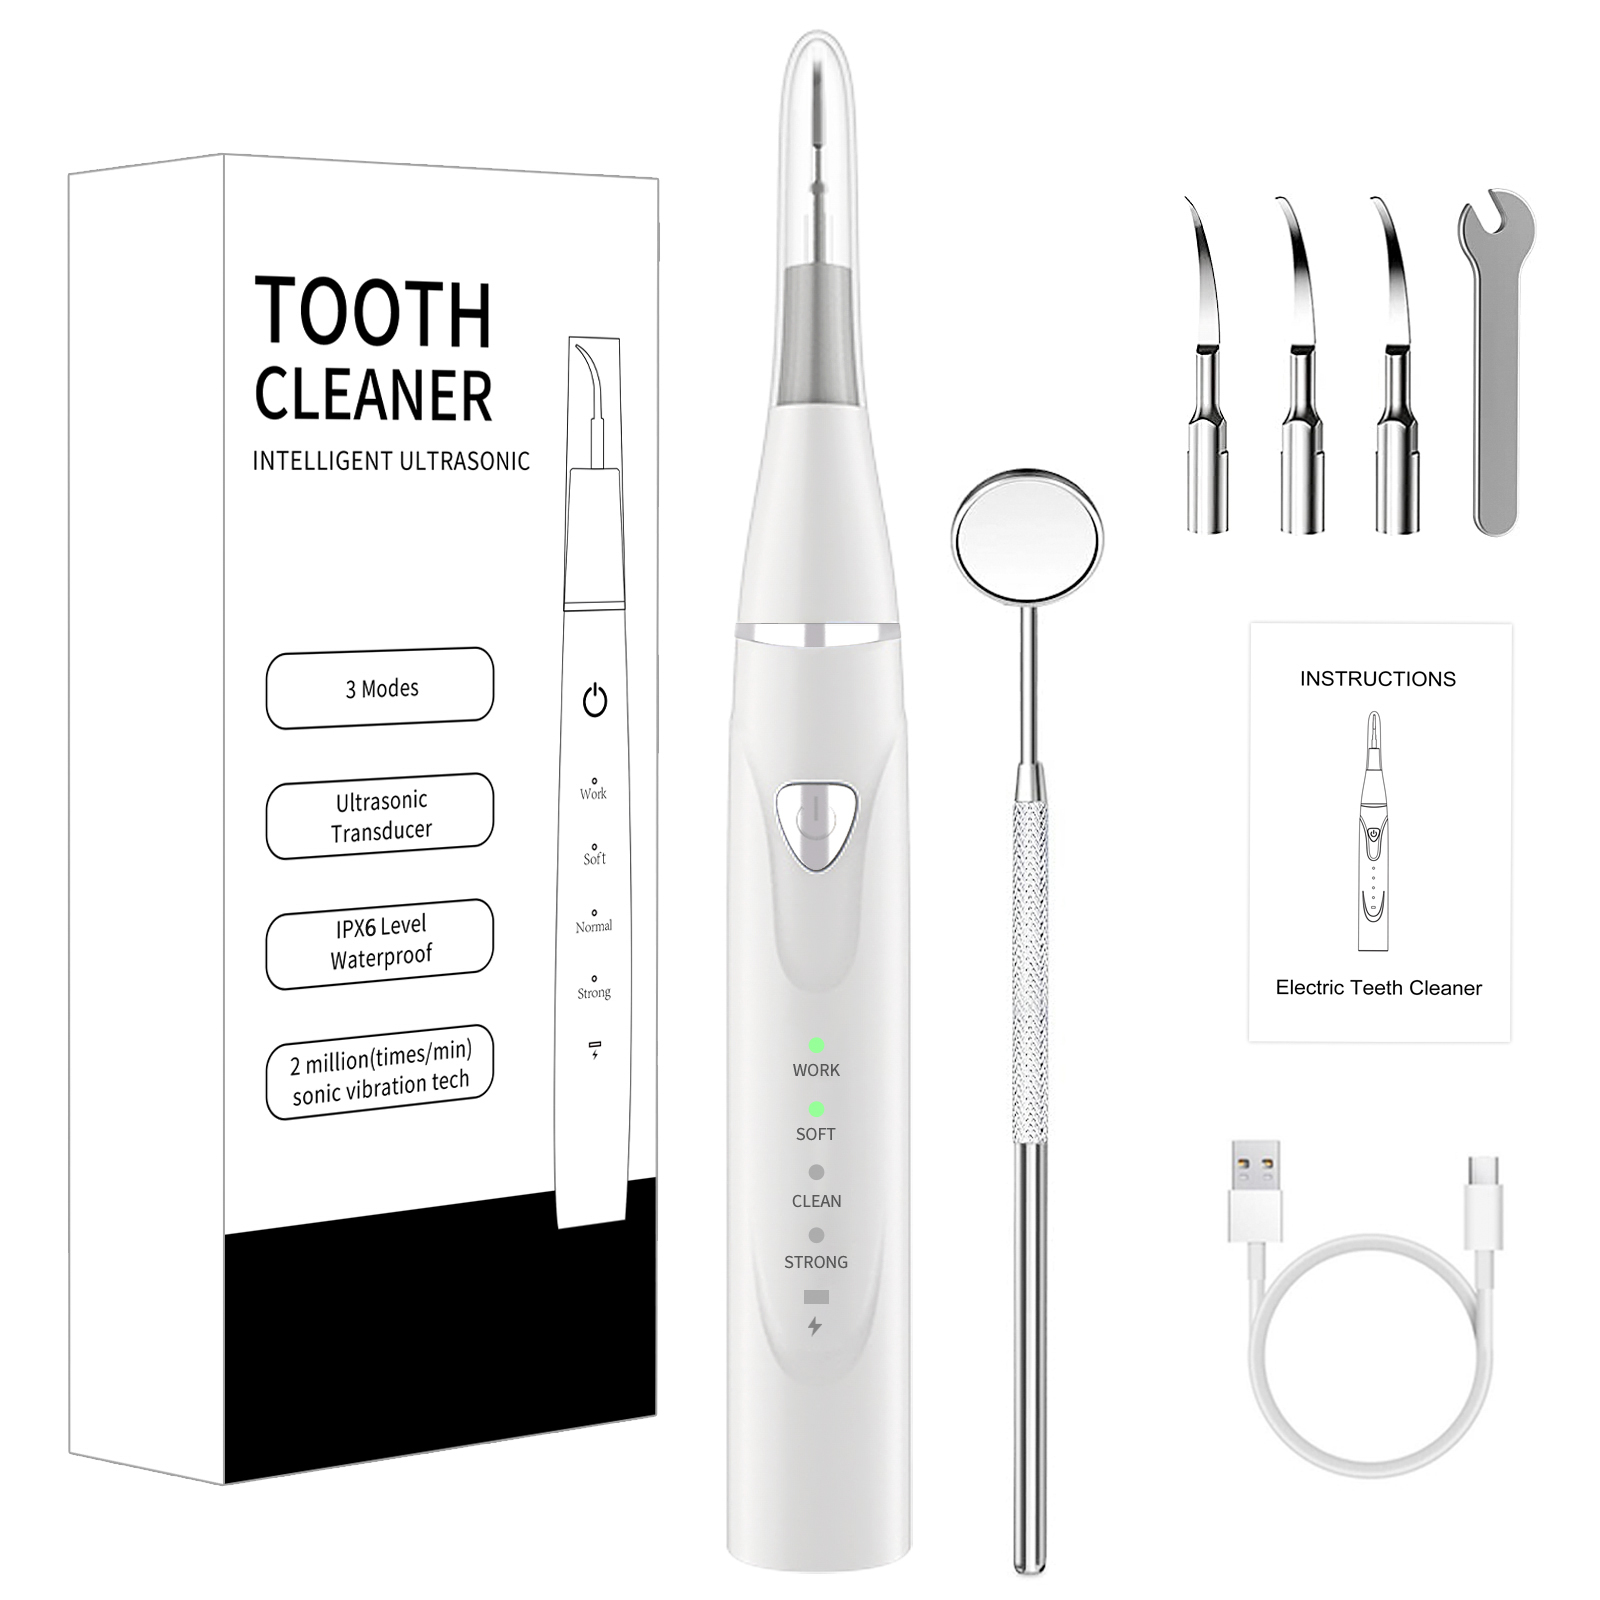 Best Price for Round Electric Toothbrush - Ultrasonic Tooth Cleaner C16m – Mlikang